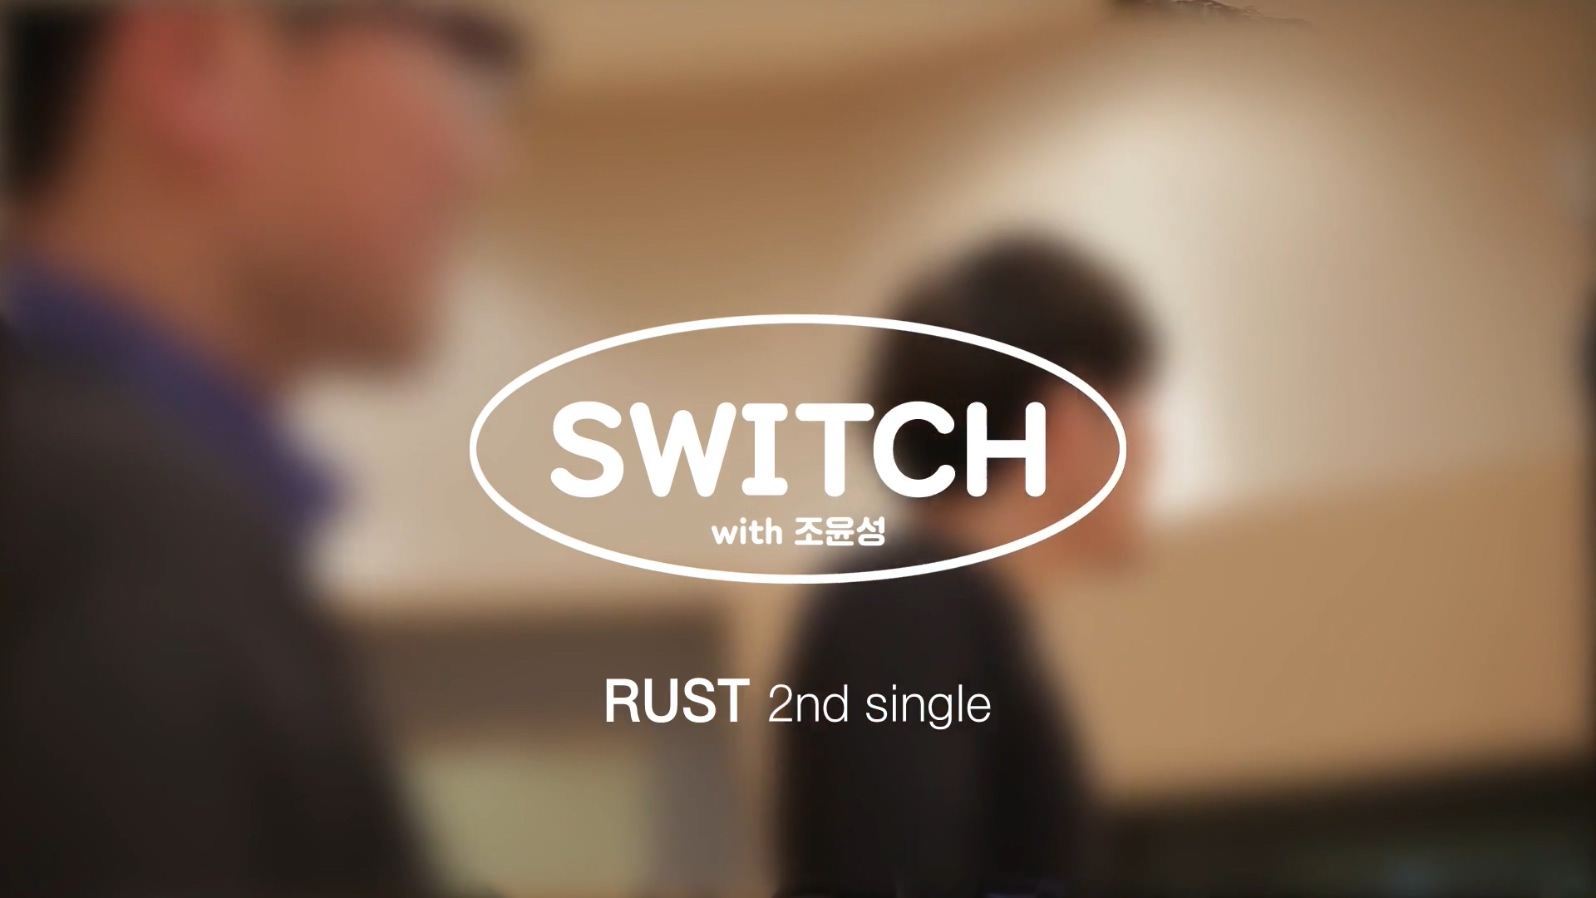 RUST 《Switch》(with Cho Yoon Seung) 1080P